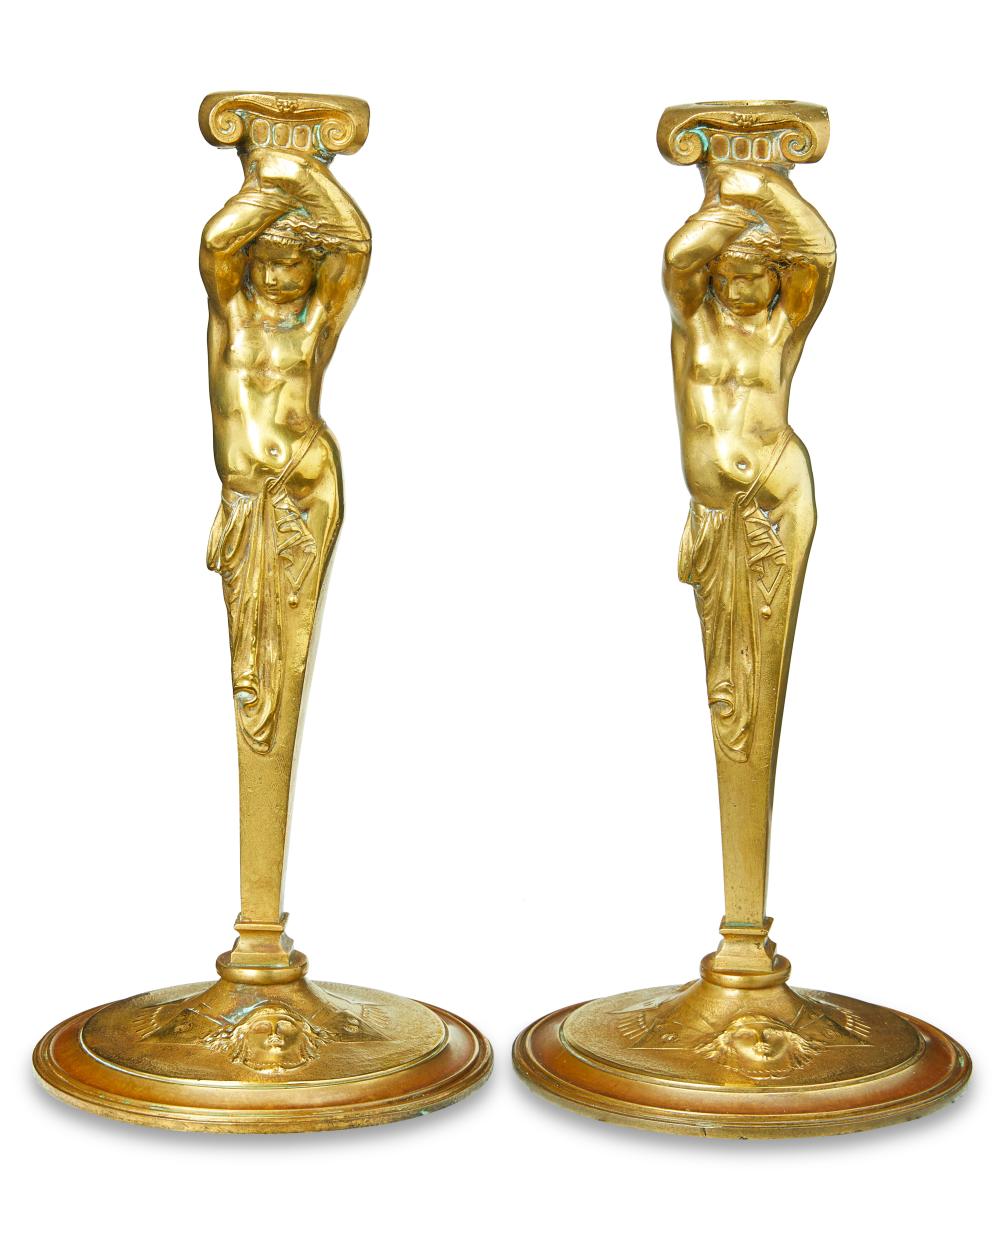 A PAIR OF CLASSICAL-STYLE FIGURAL